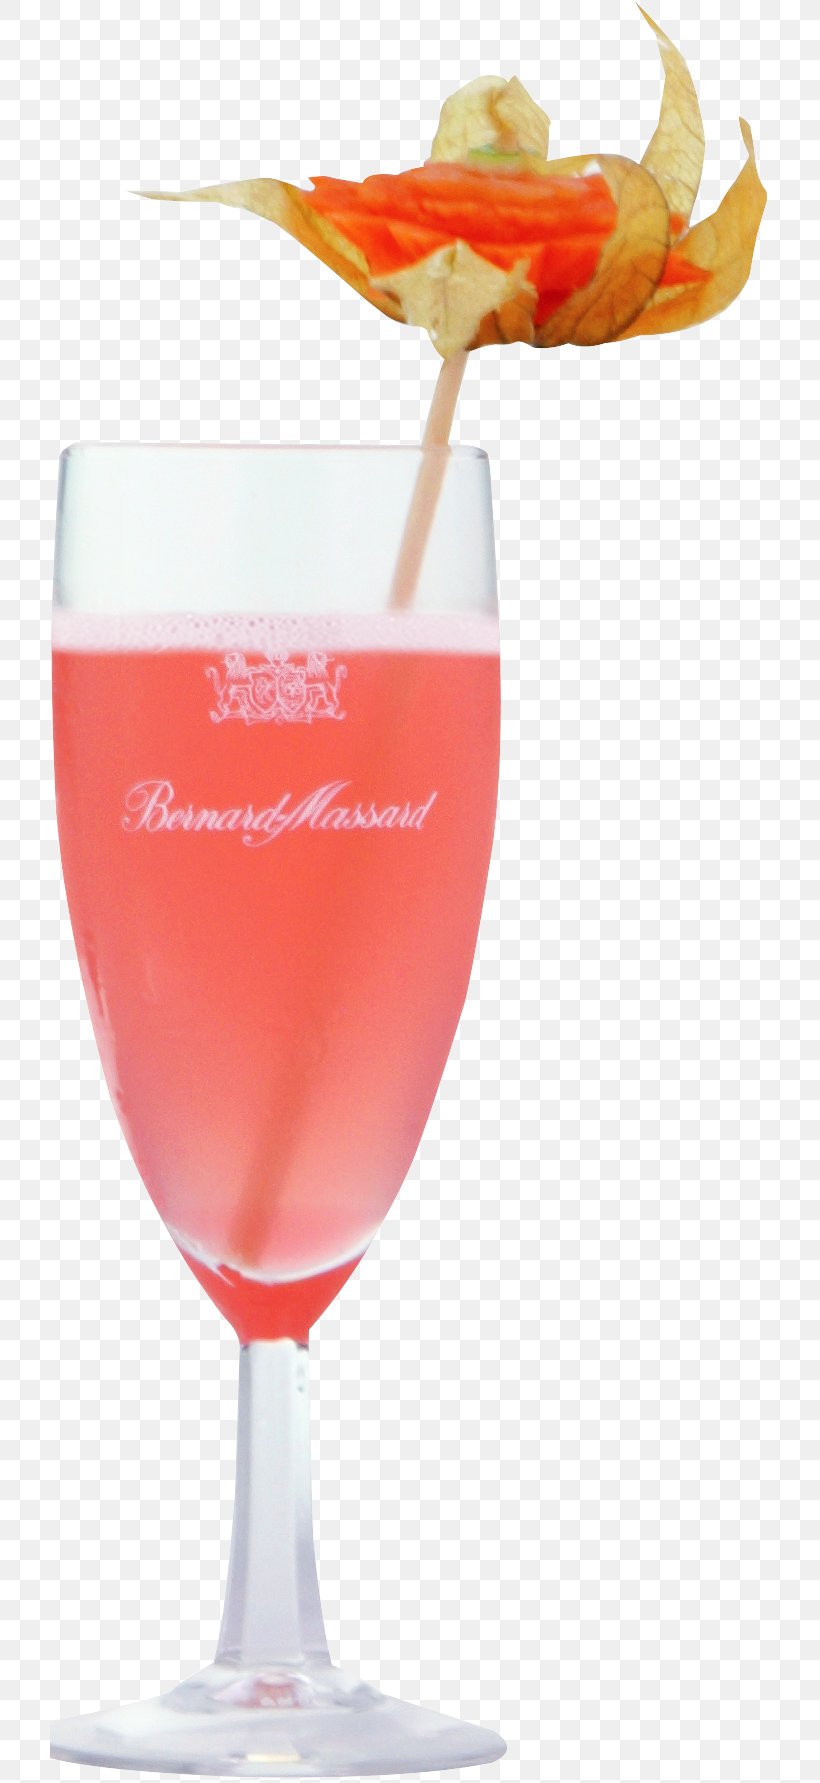 Cocktail Garnish Wine Cocktail Singapore Sling Sea Breeze Champagne Cocktail, PNG, 720x1783px, Cocktail Garnish, Champagne, Champagne Cocktail, Champagne Glass, Champagne Stemware Download Free